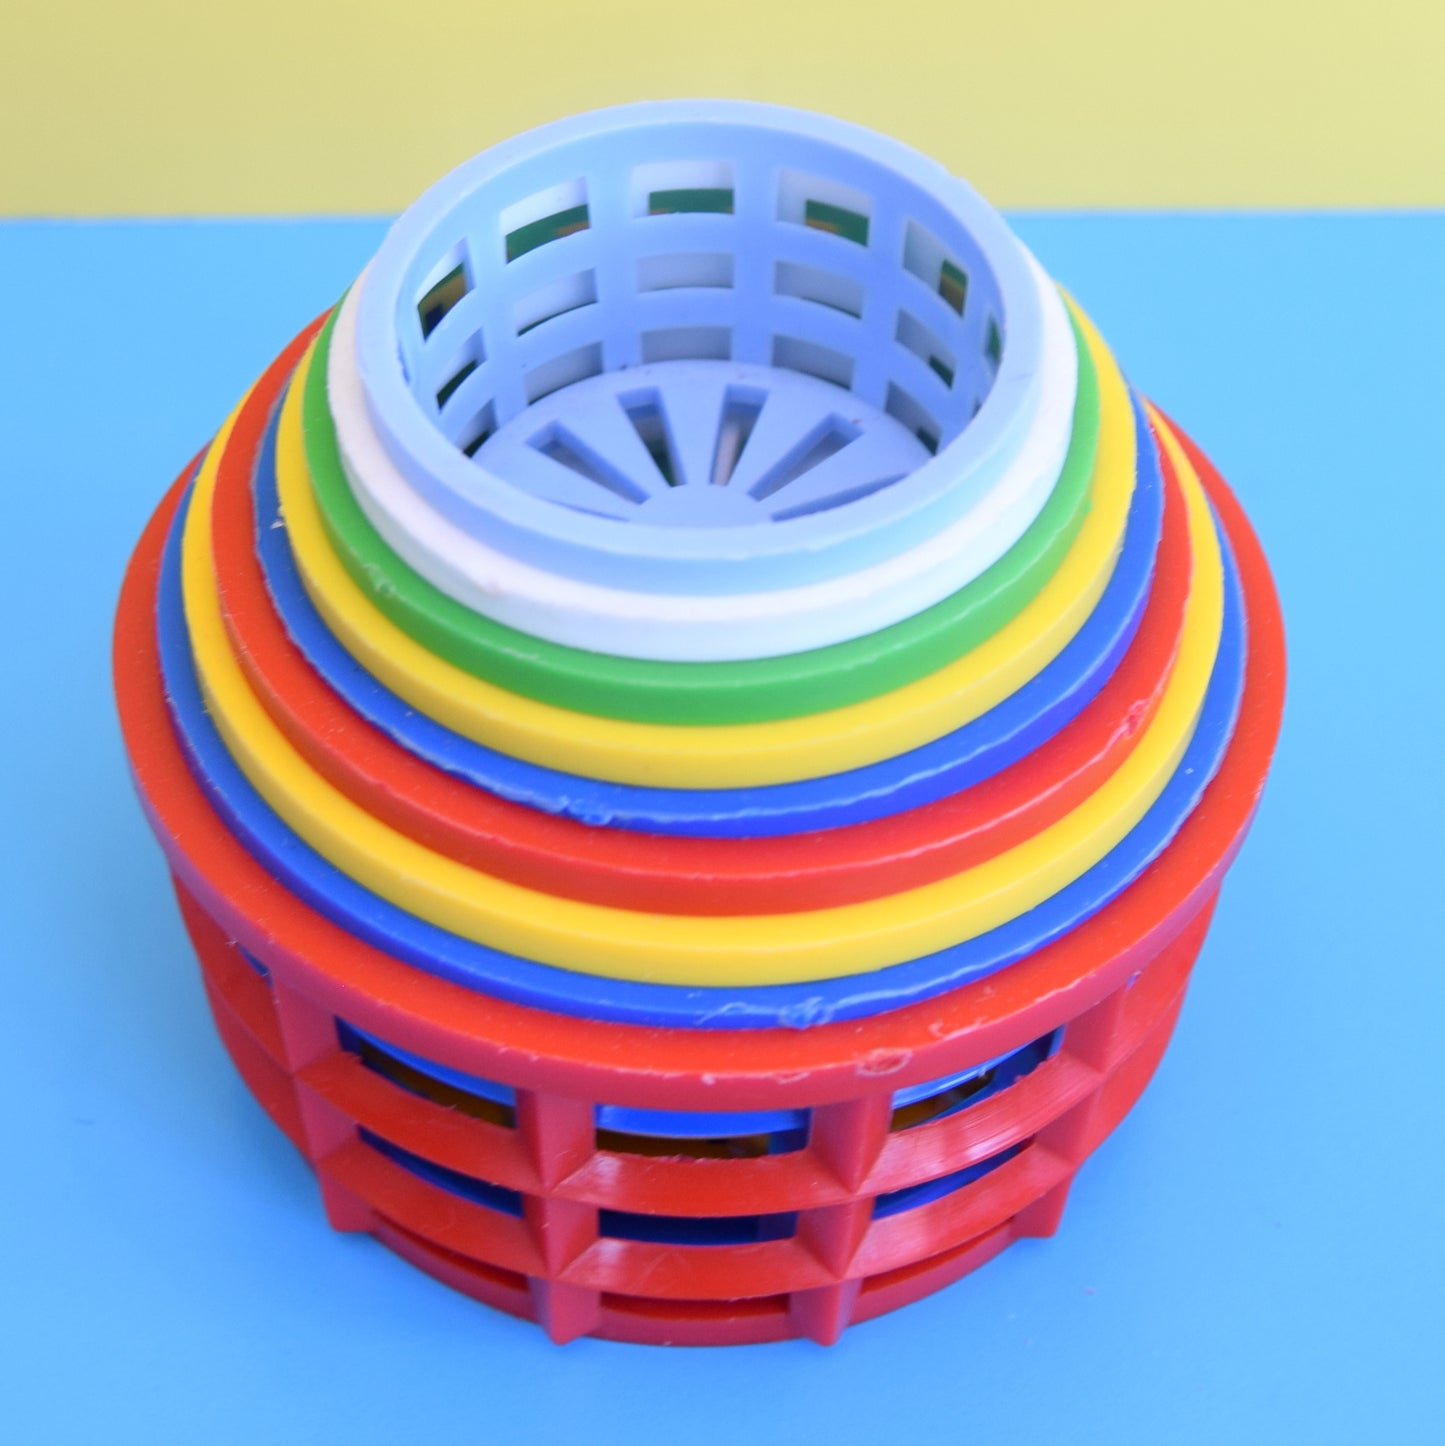 Vintage 1960s Plastic Stacking Cups/ Baskets - Bright Colours